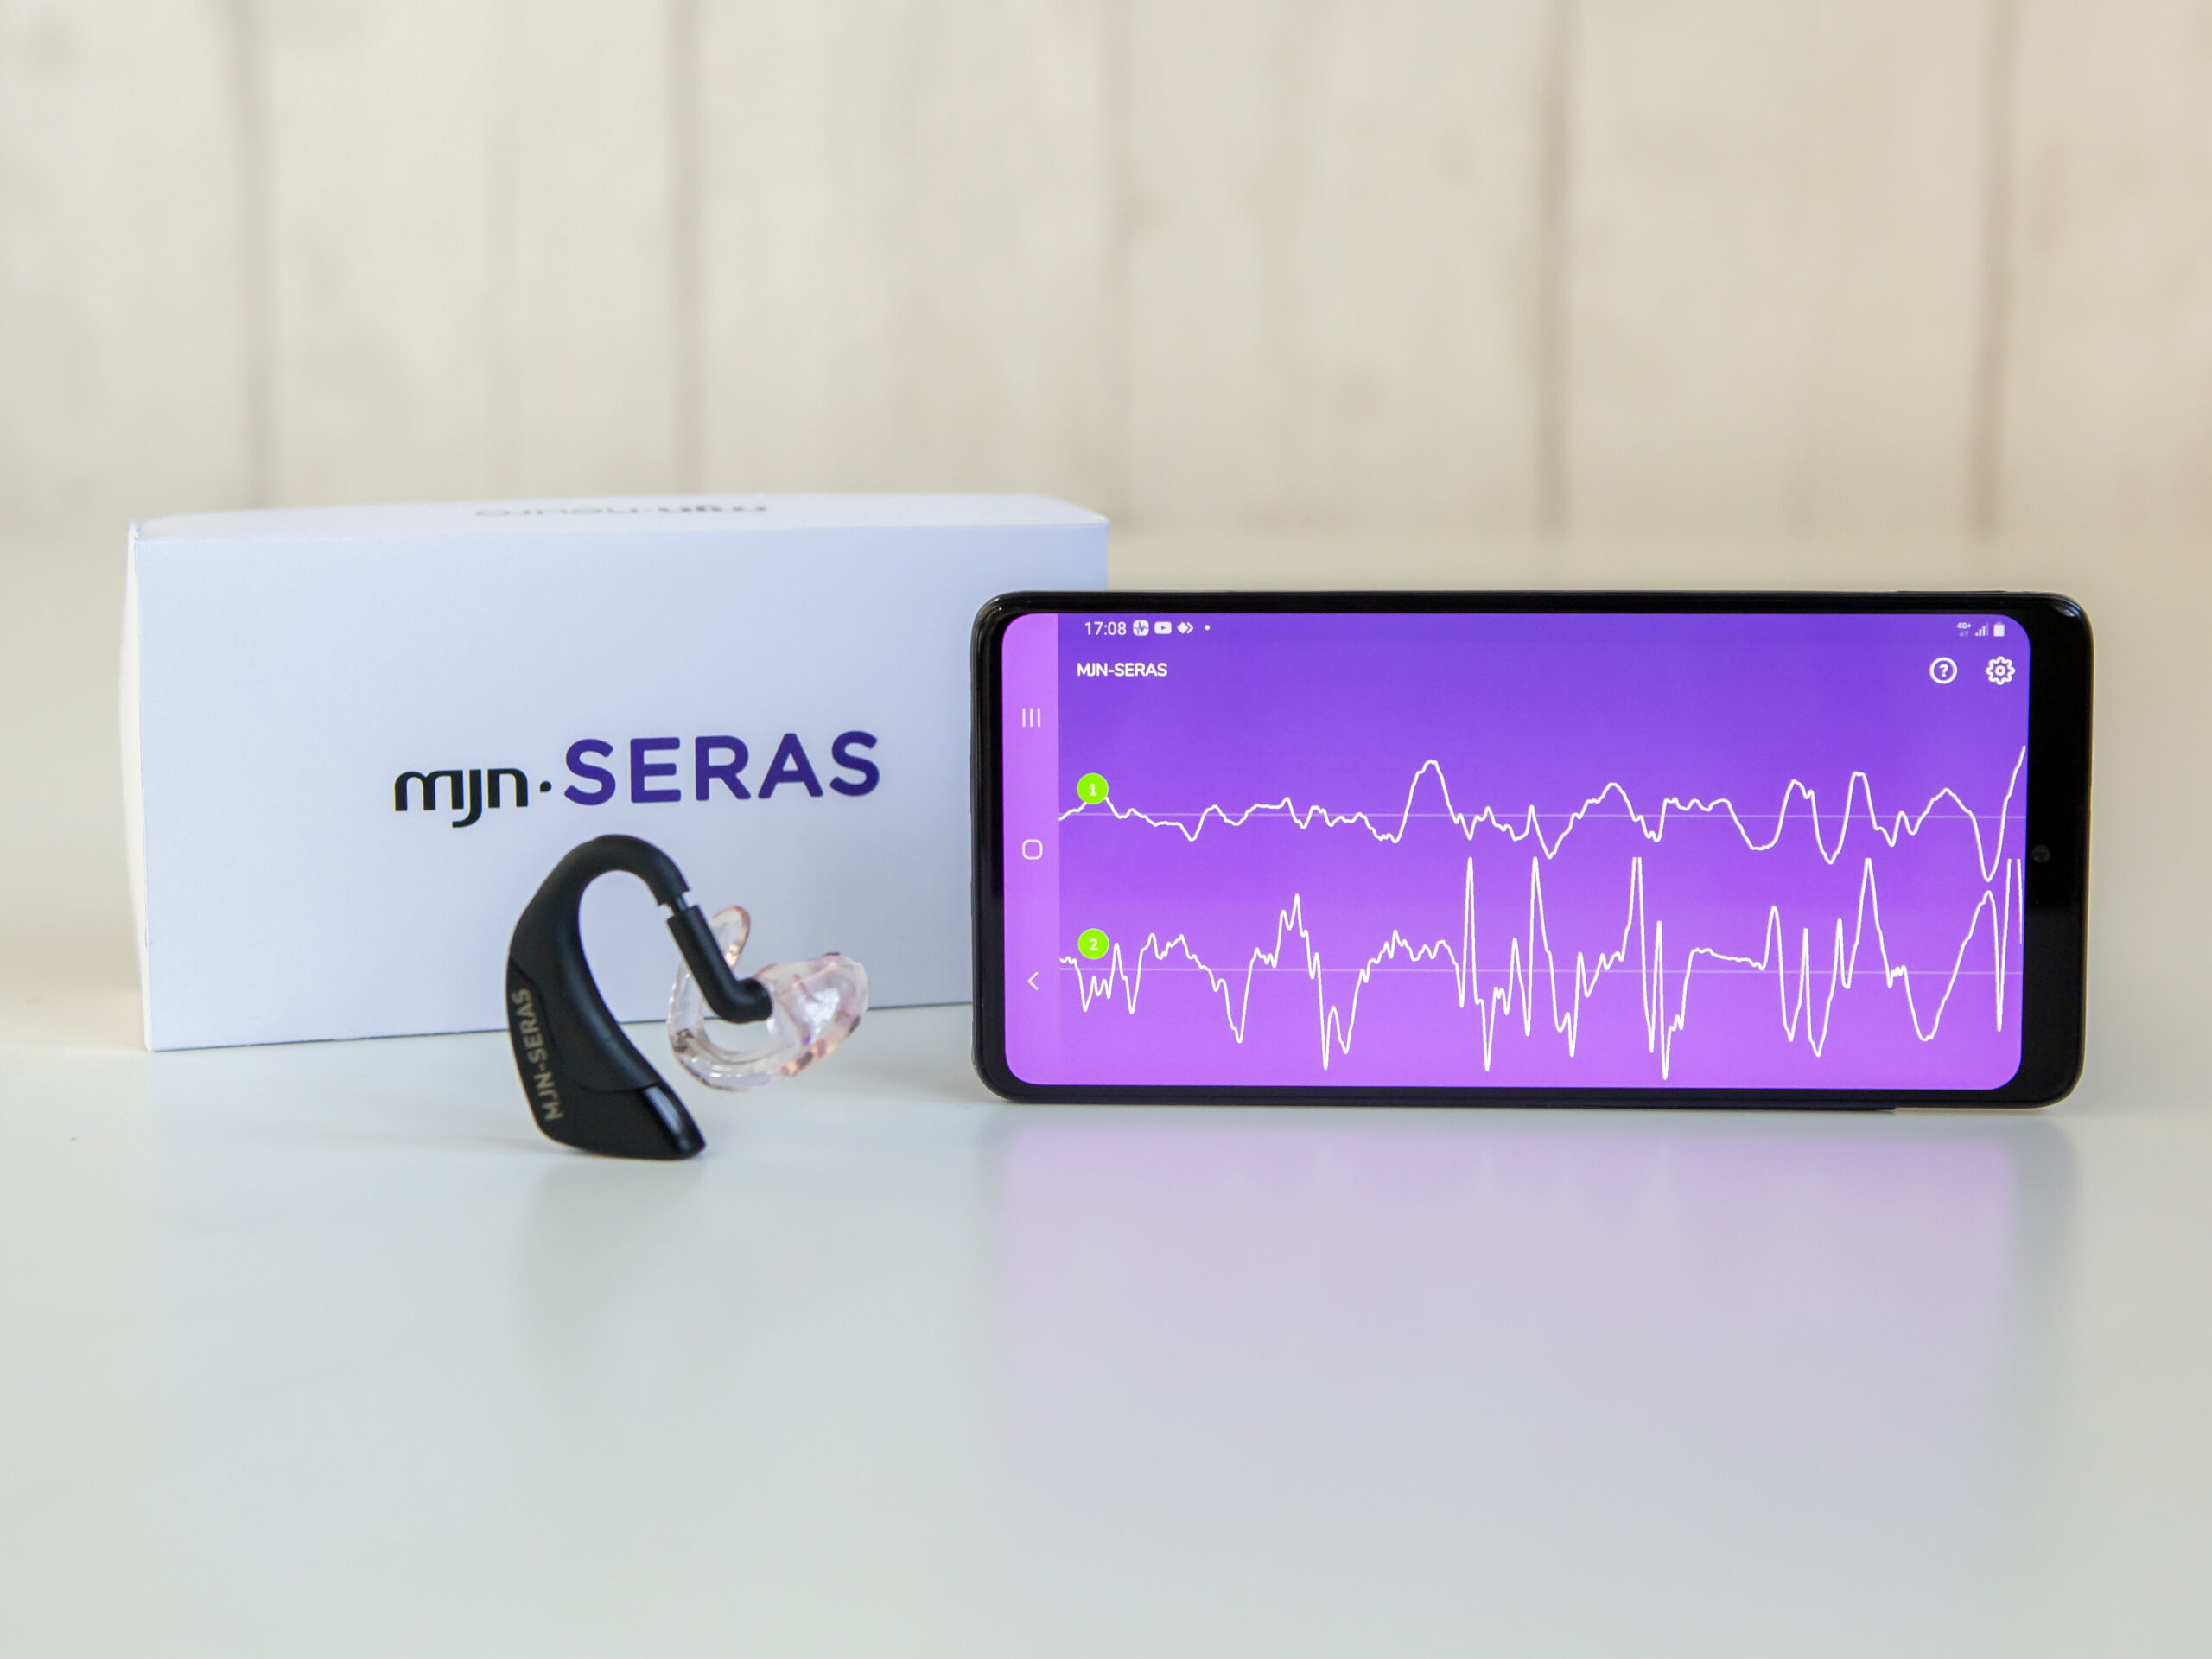 Ground-breaking mjn-SERAS seizure monitoring device that uses artificial intelligence to predict and alert of imminent seizures launches in the UK 1